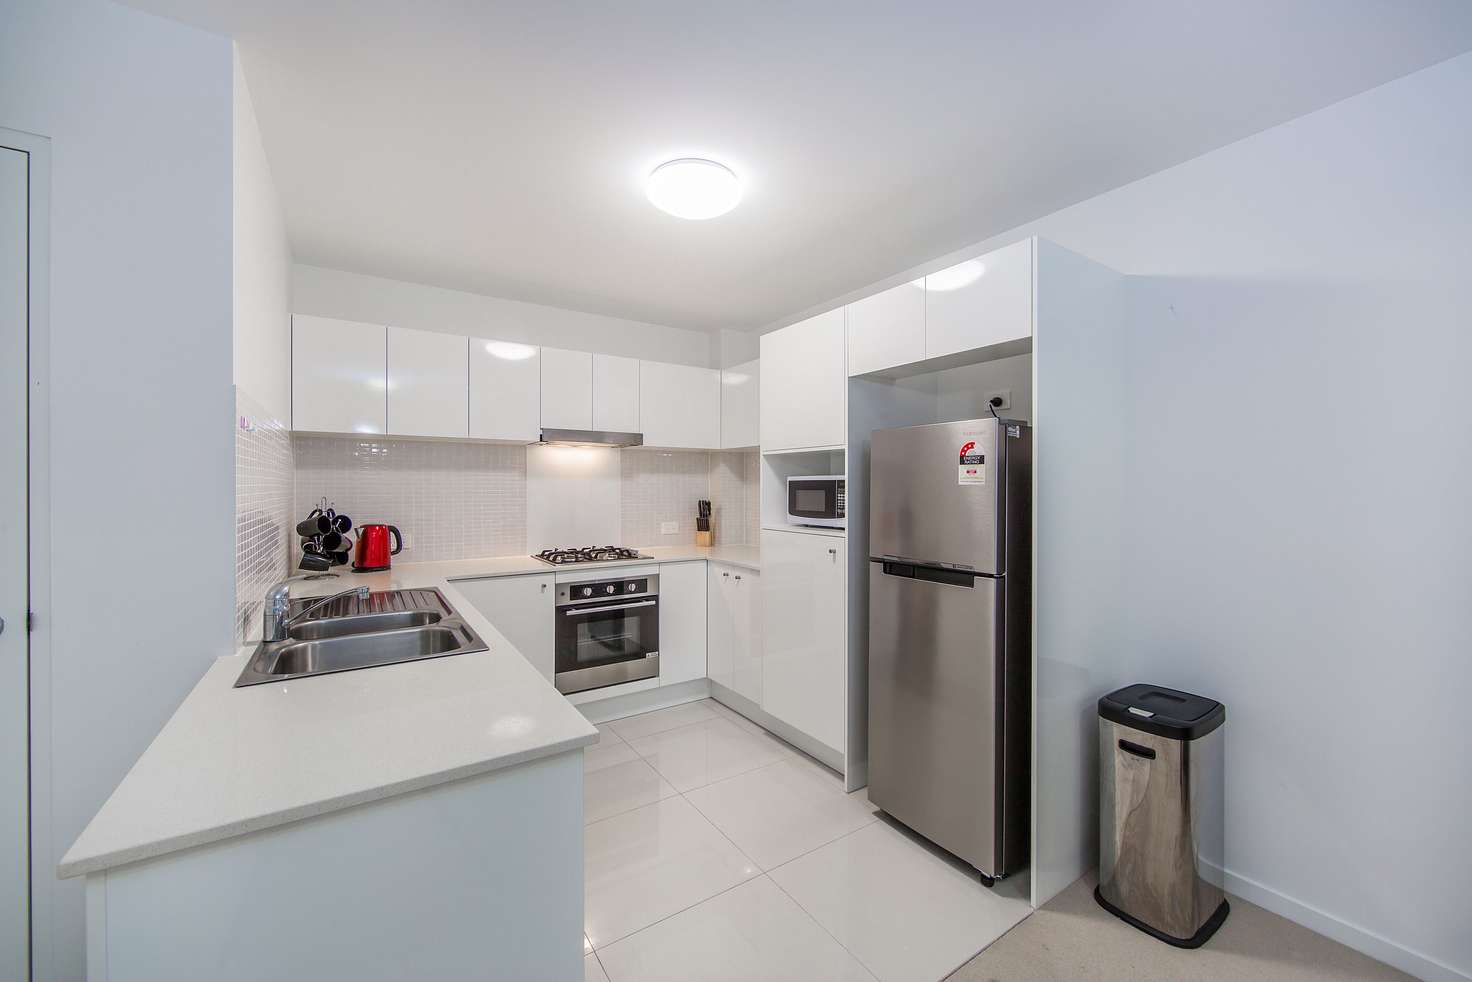 Main view of Homely unit listing, 2001/19 Playfield Street, Chermside QLD 4032